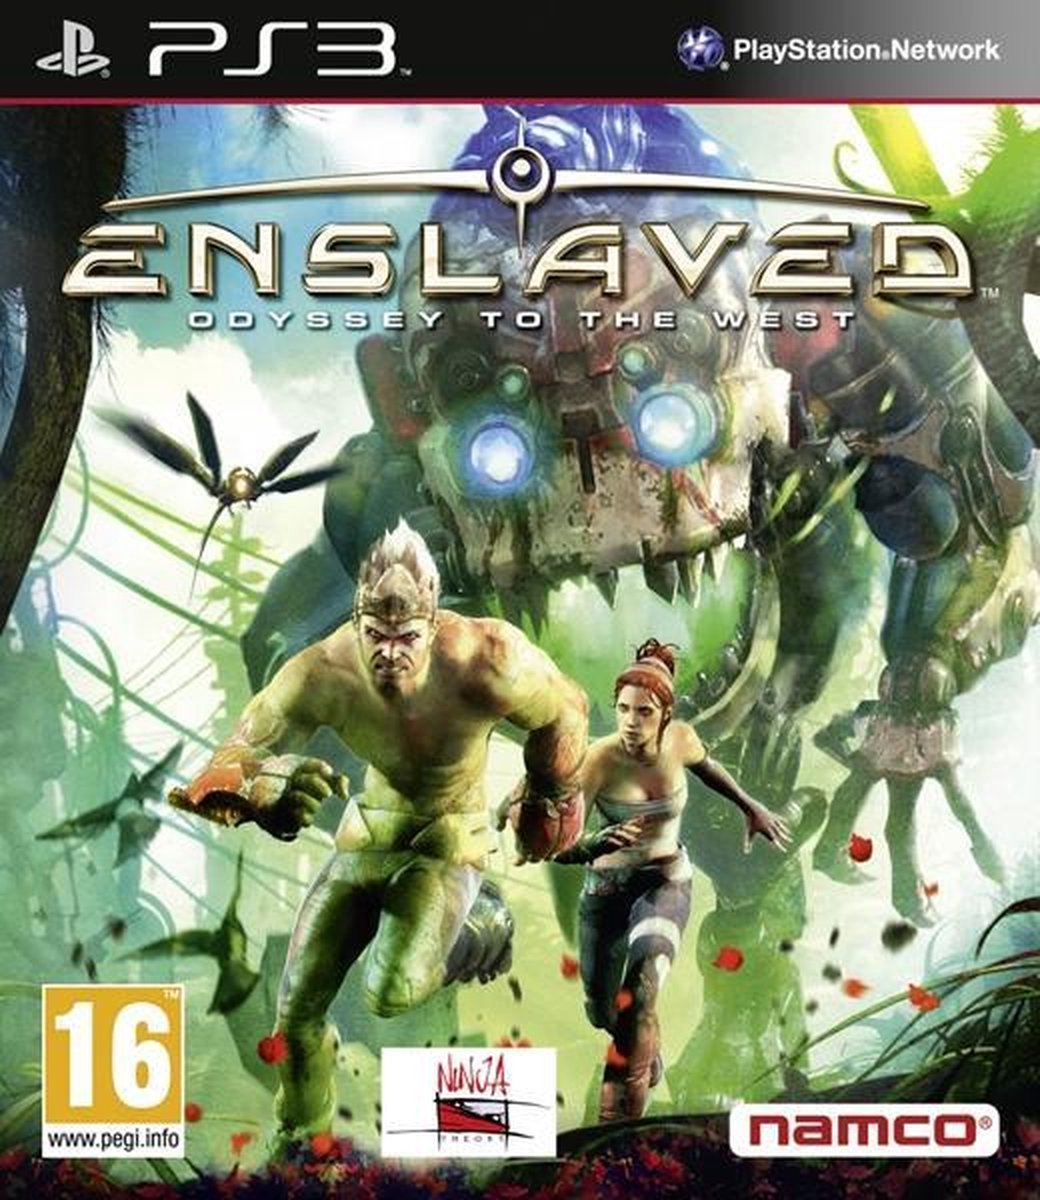 enslaved odyssey to the west ps3 download free